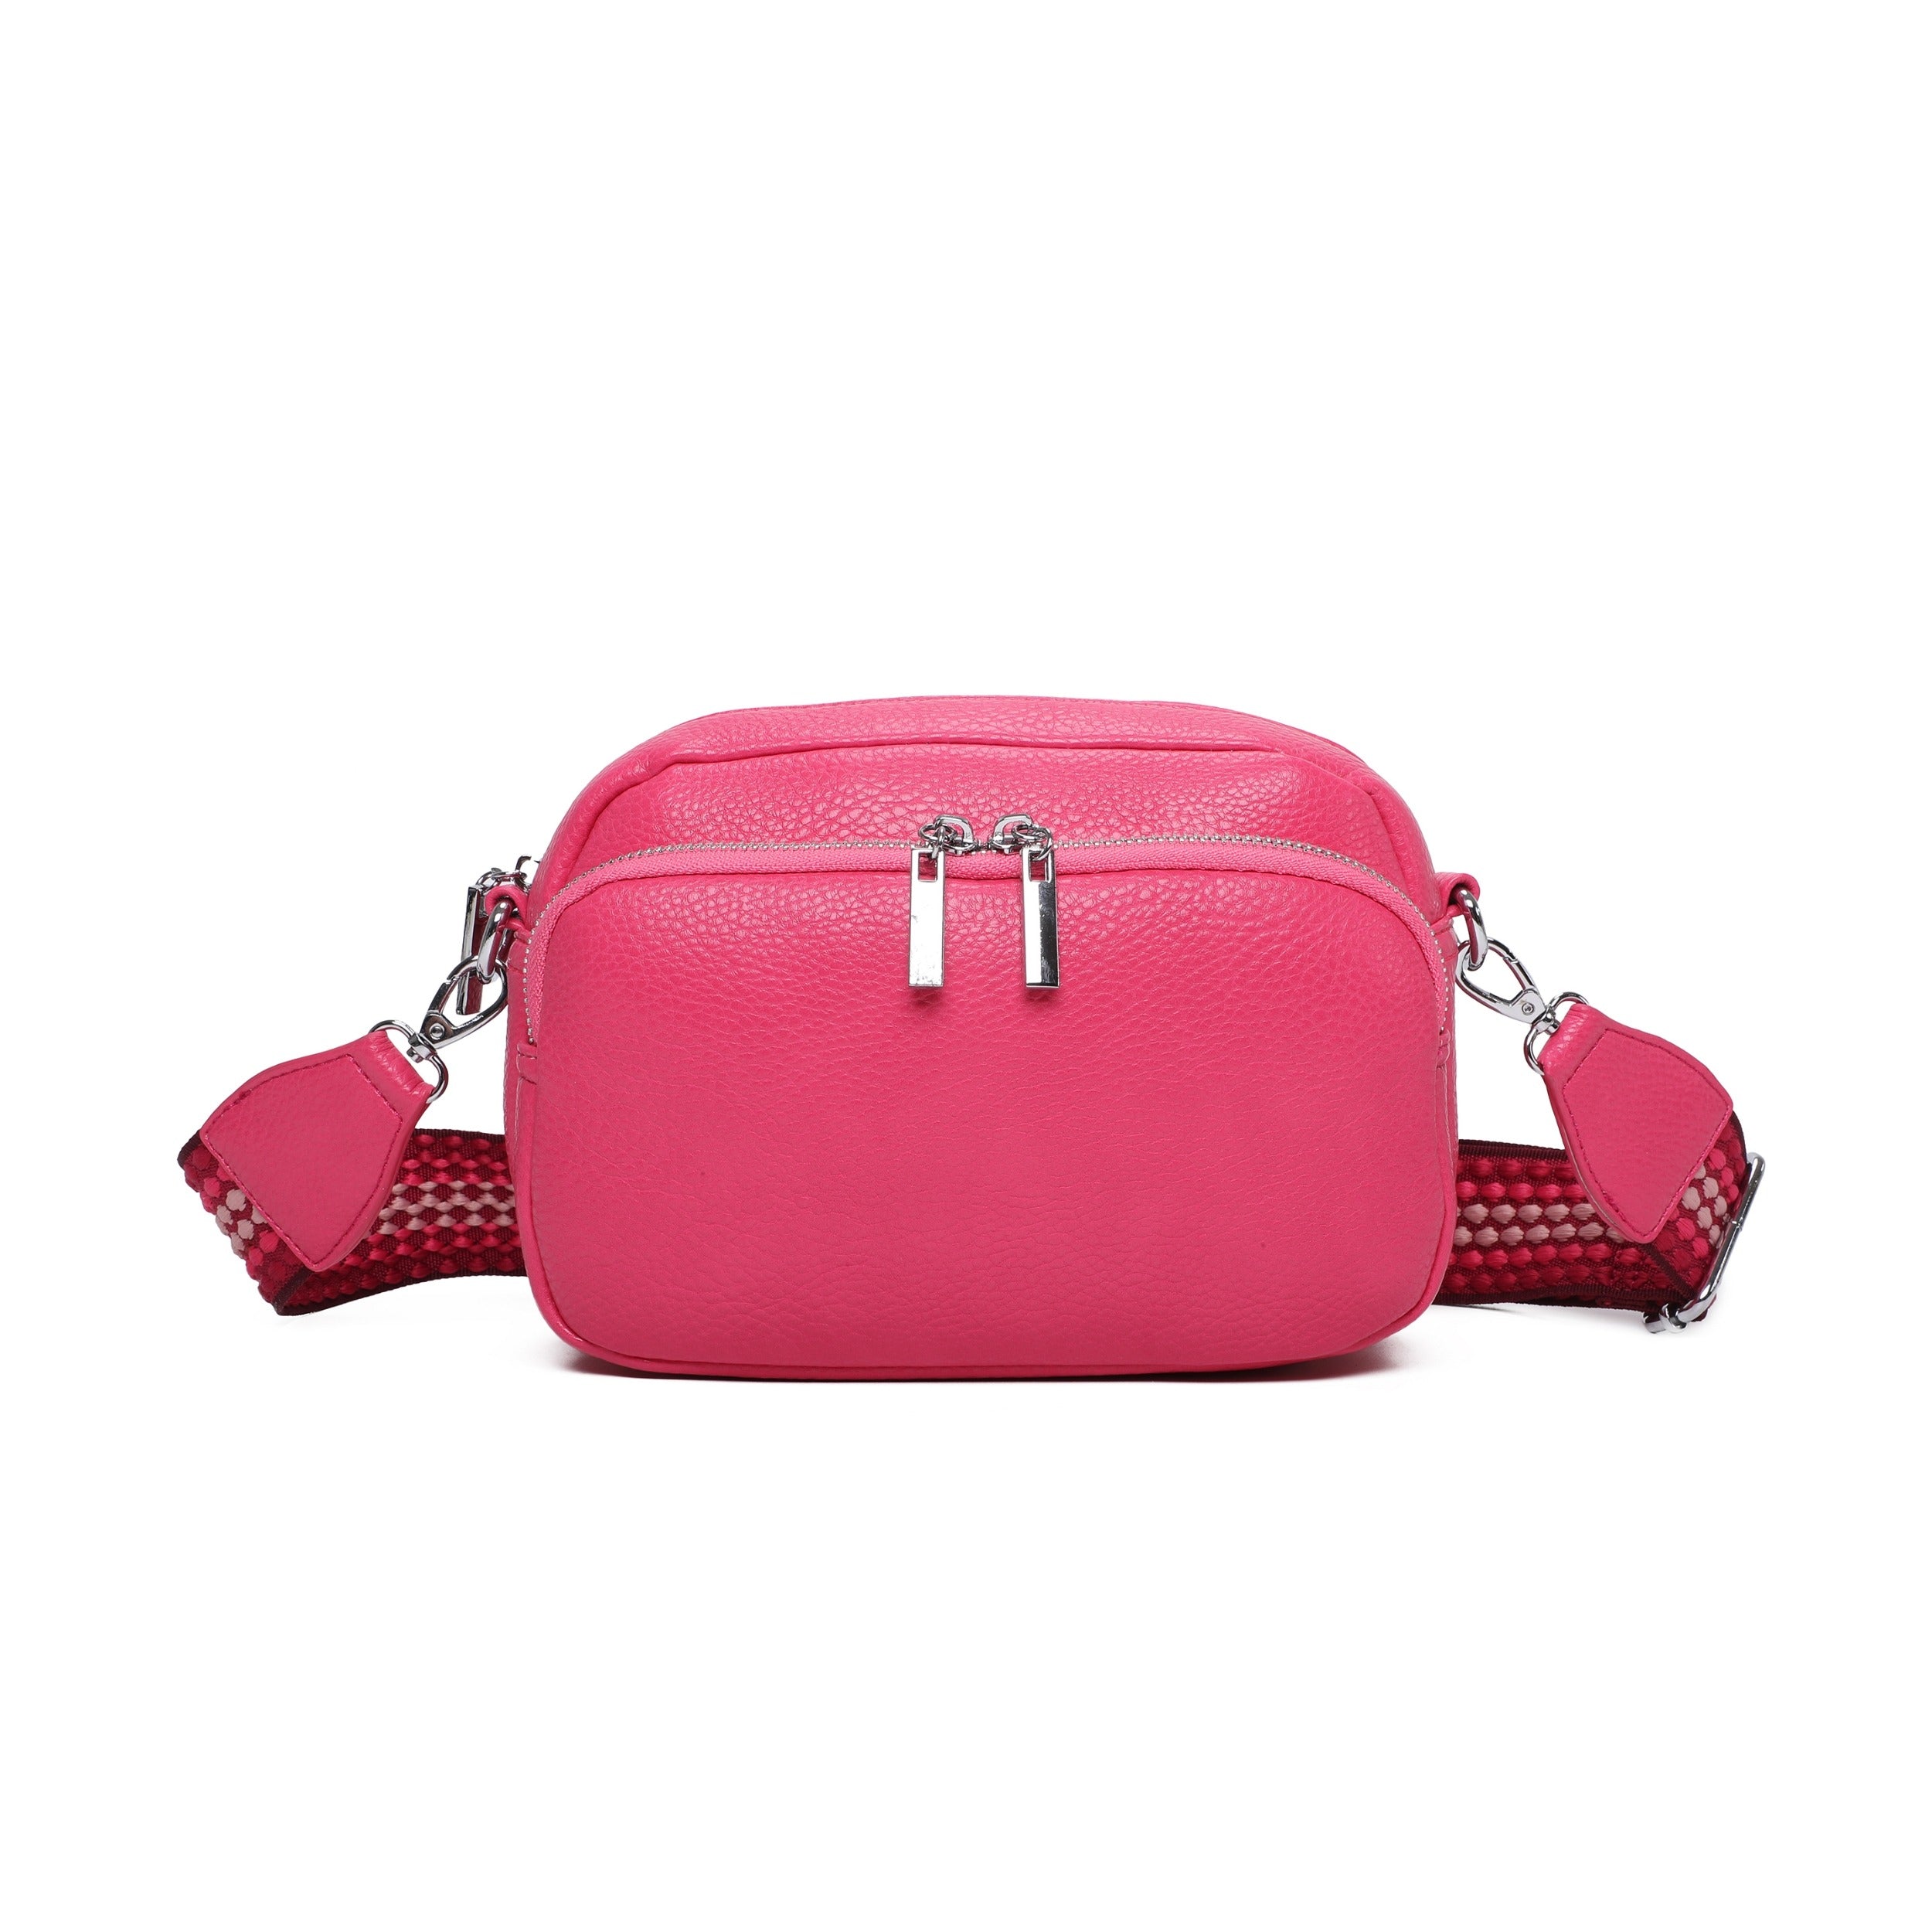 Craze London Crossbody Bag with Colorful Strap